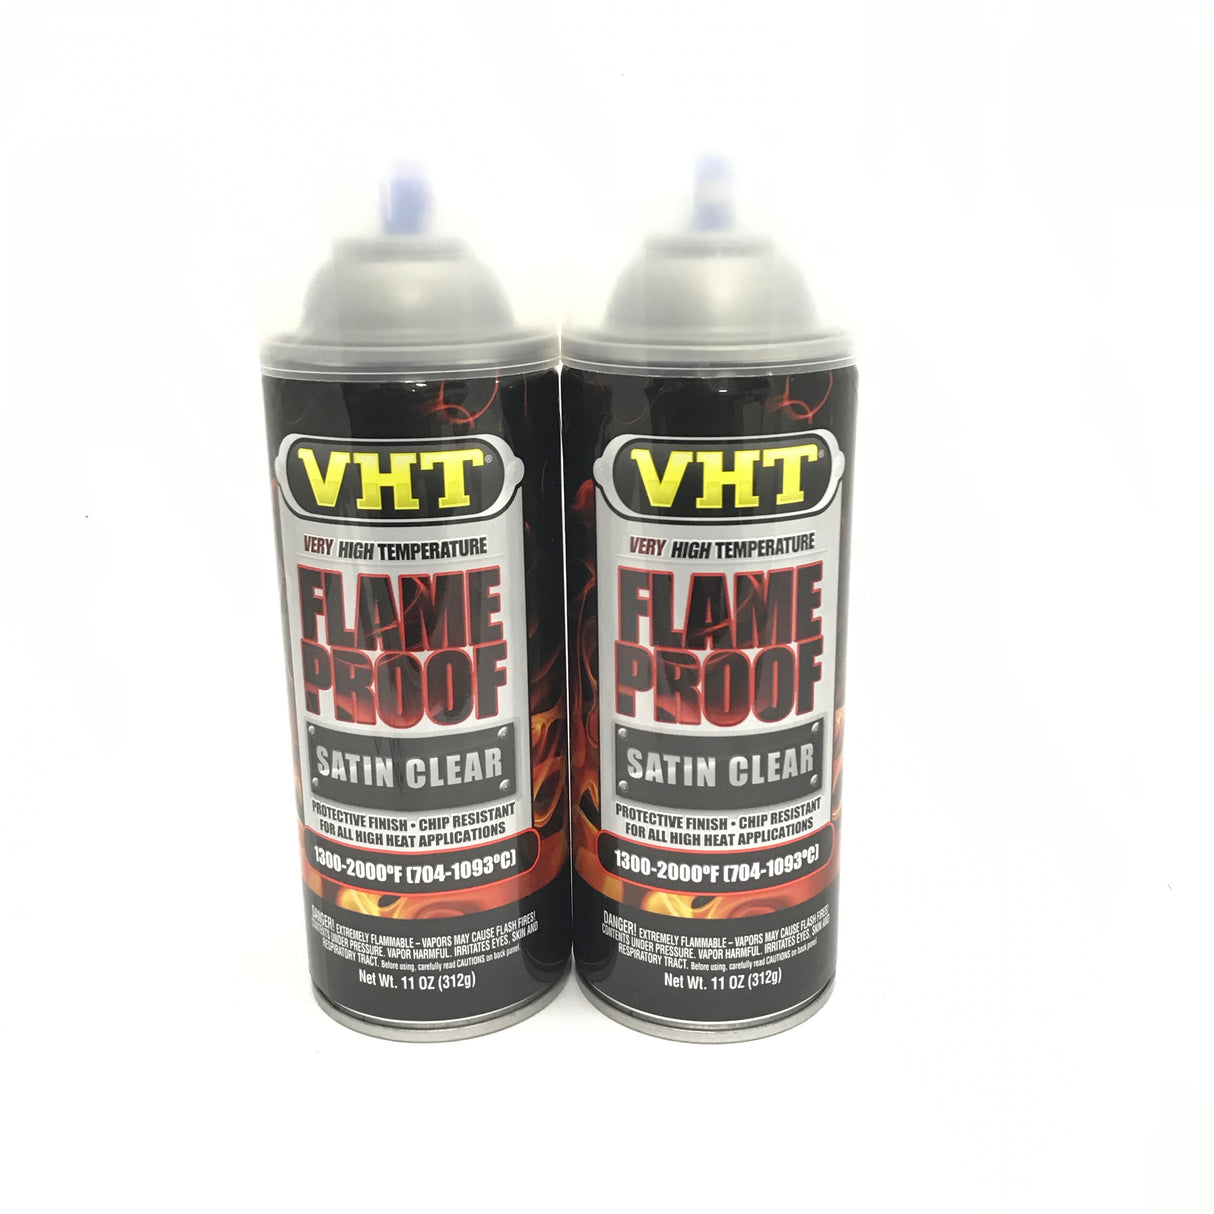 VHT SP115-2 PACK SATIN CLEAR High Temperature Flame Proof Header Paint - 11 oz